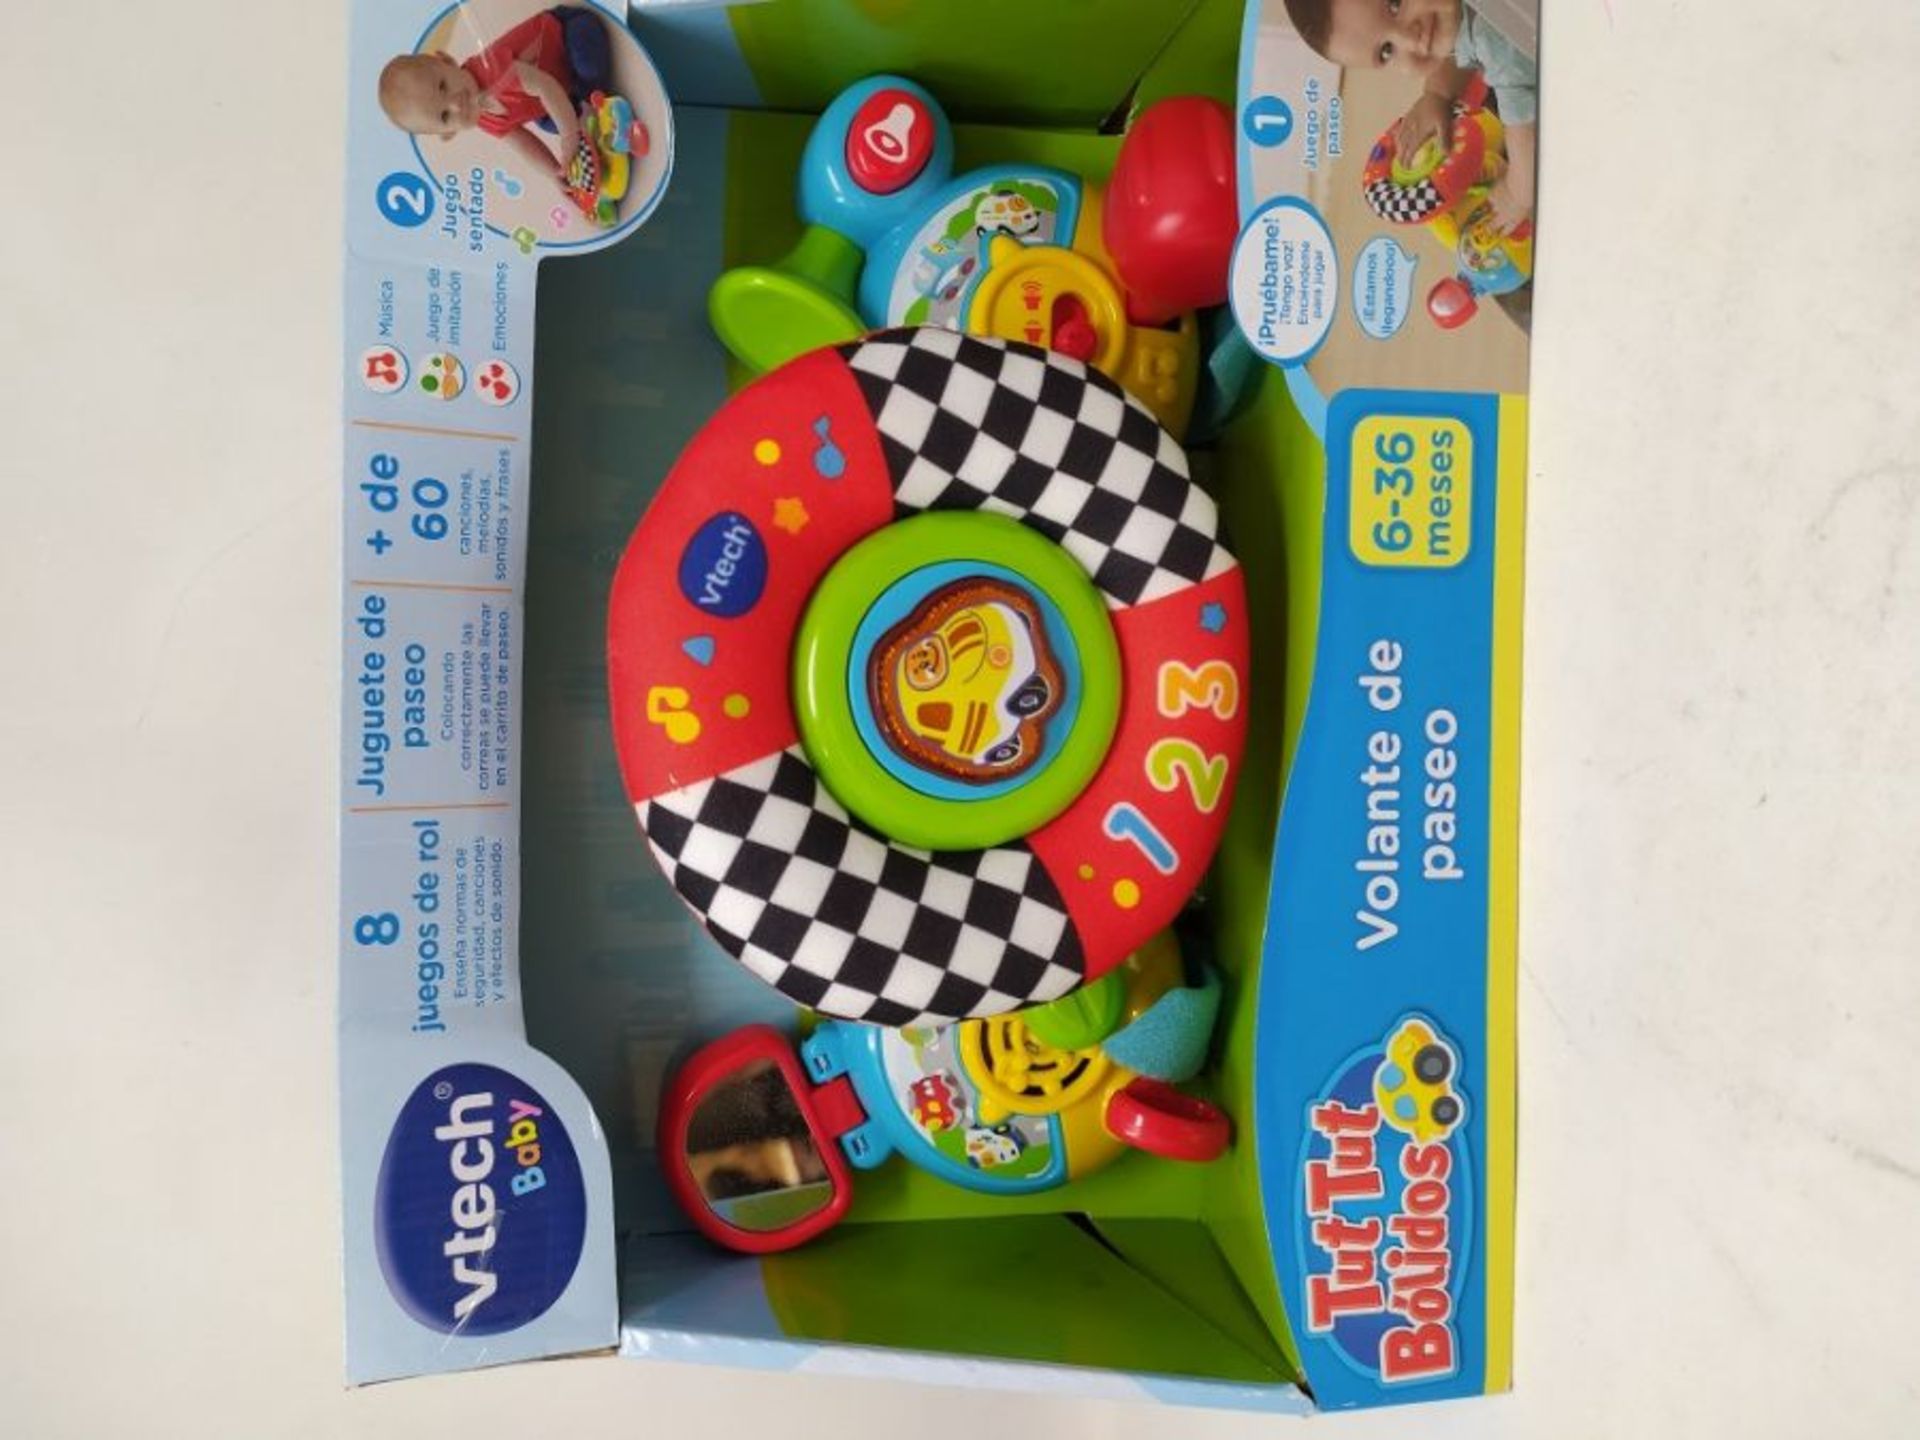 VTech Steering Wheel Tut Tut Drive, Stroller Toy with Holding Strips, Driving Simulato - Image 2 of 2